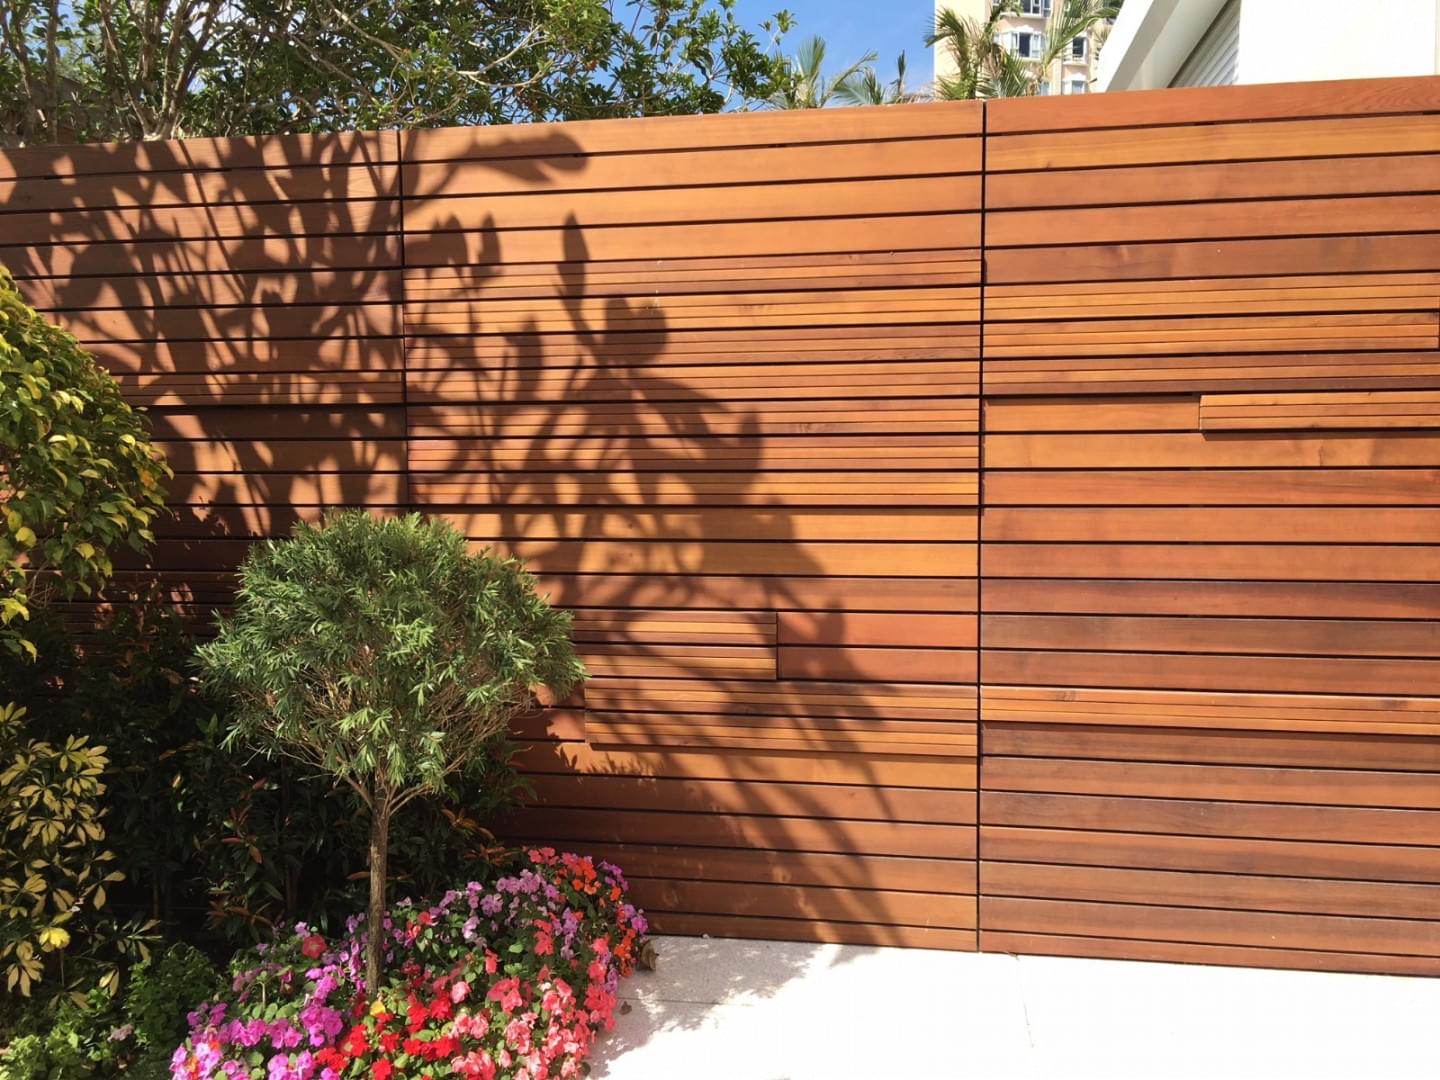 Bamboo / Landscaping from Canica